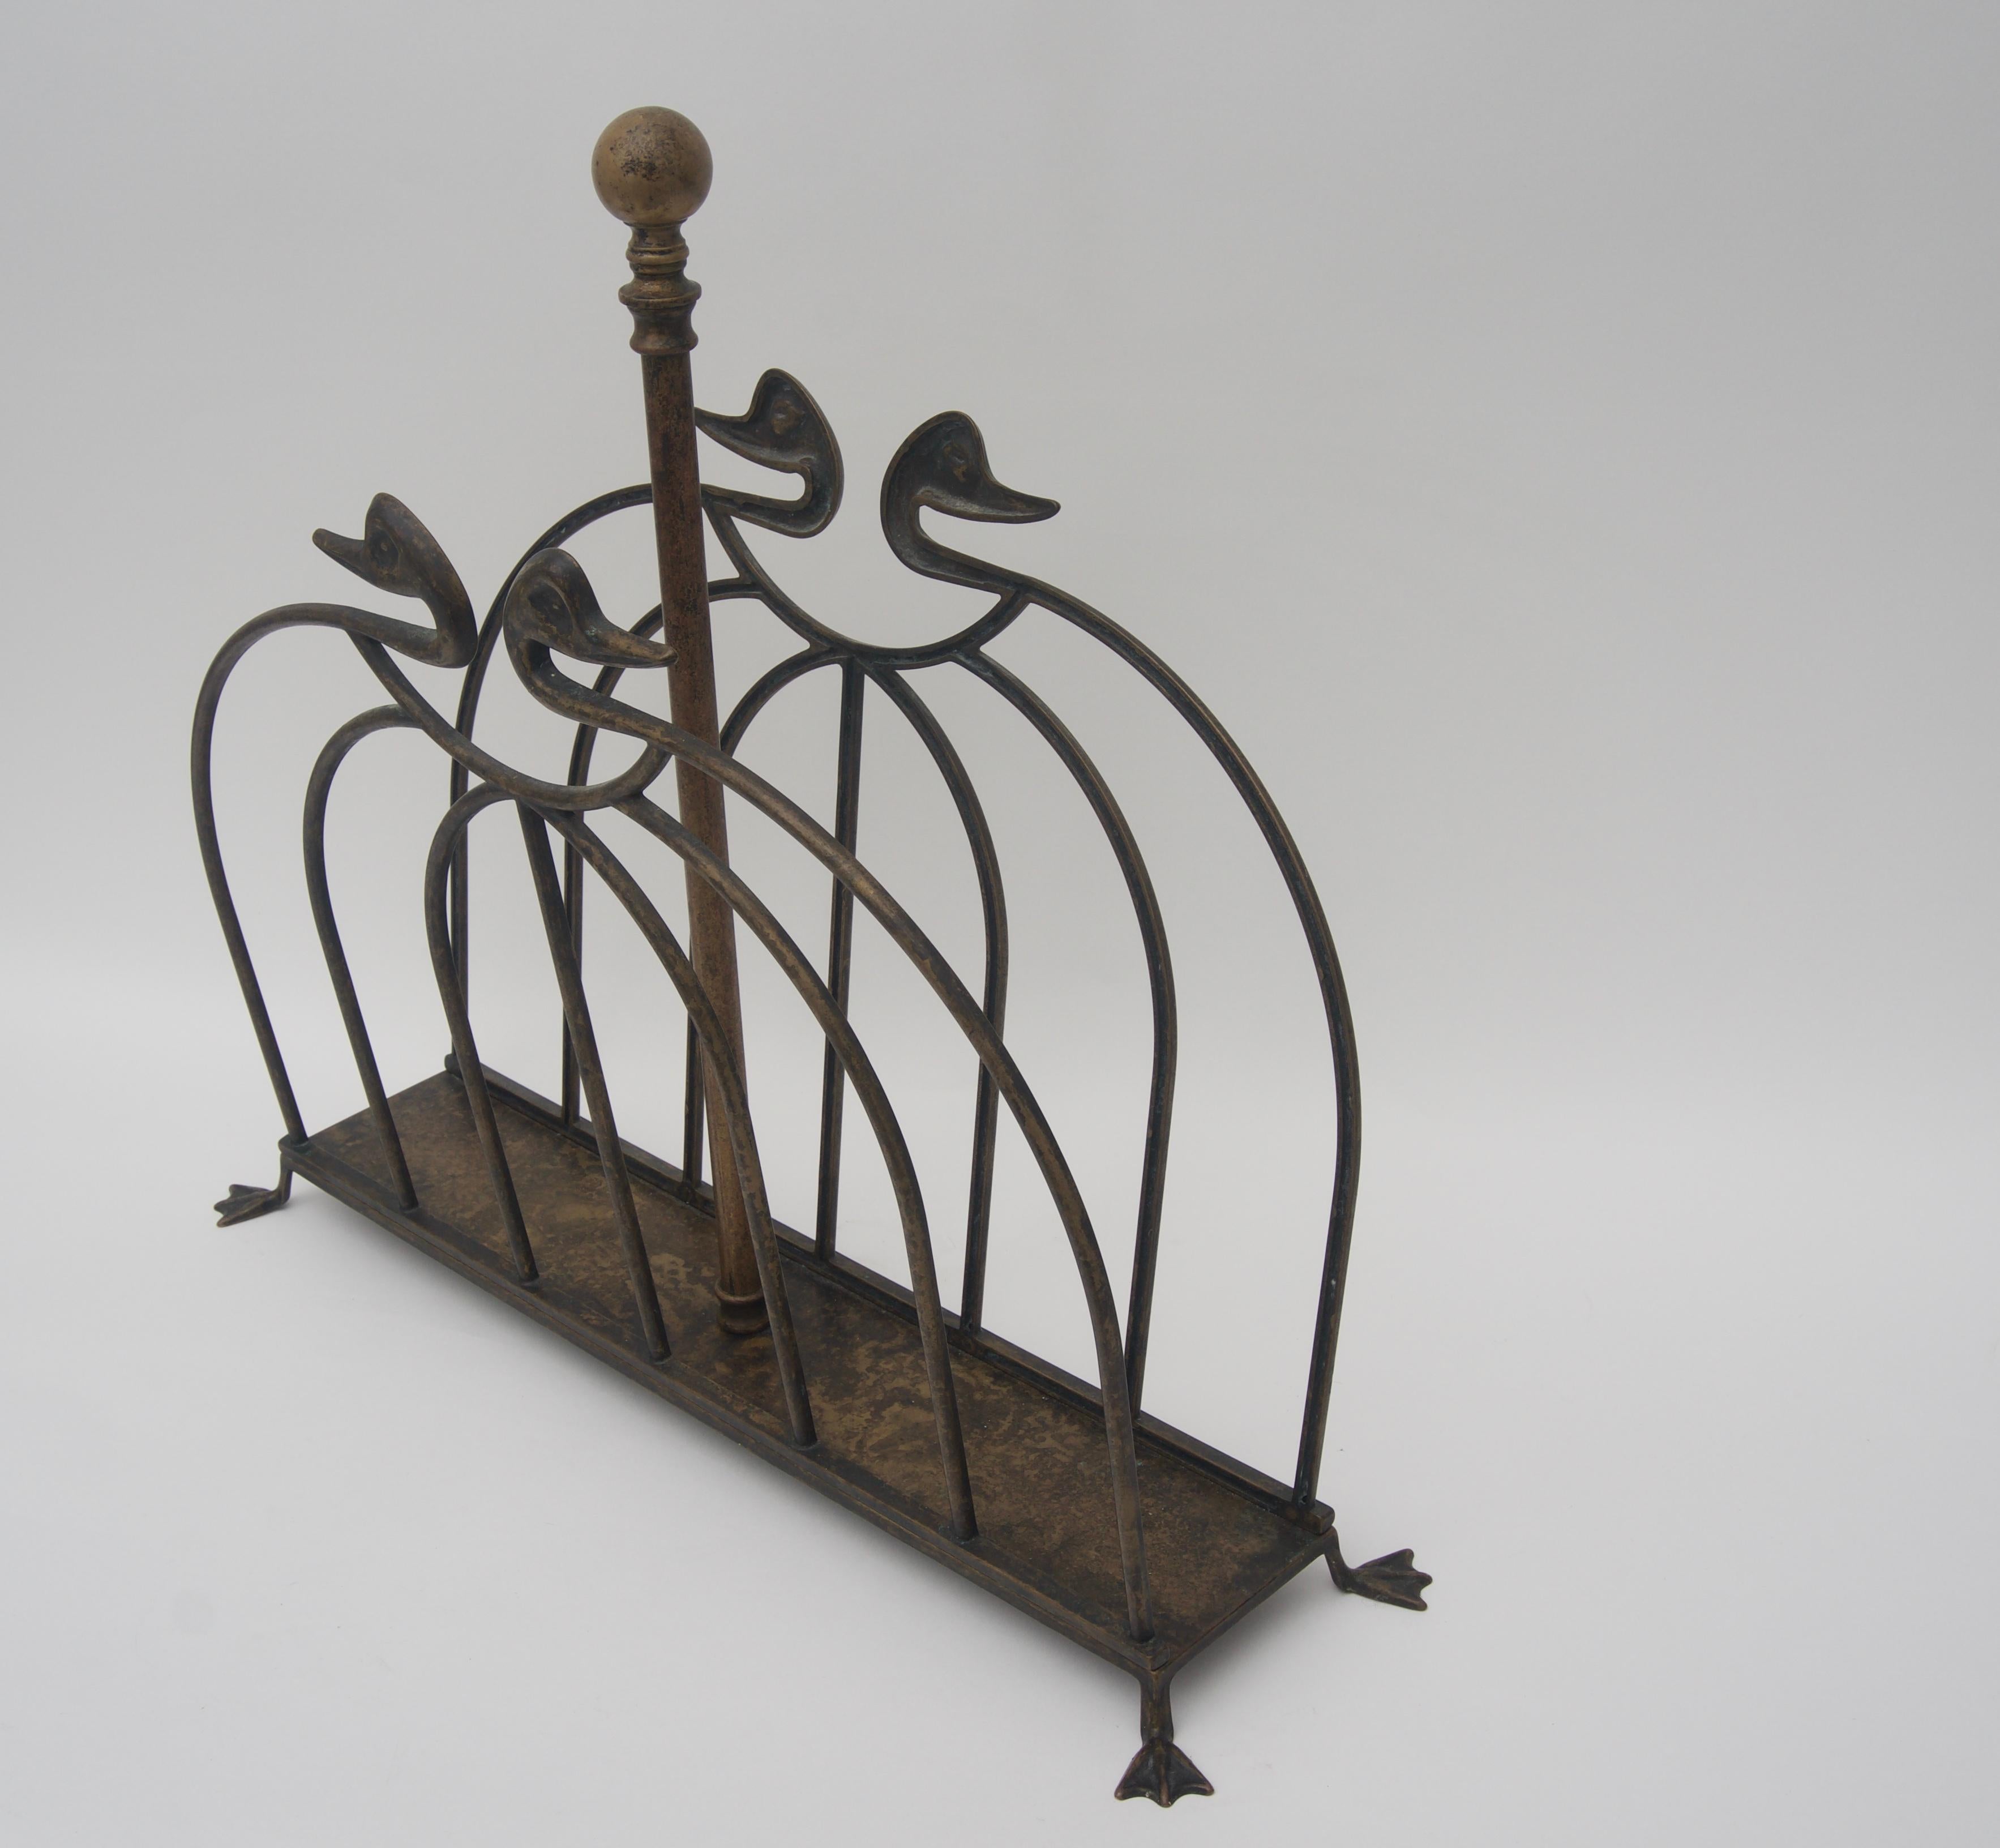 This stylish magazine holder is very much in the style and quality of pieces created by Maison Jansen and it dates to the 1960s. The piece is fabricated in bronze and retains an original made in Italy label on the underside.